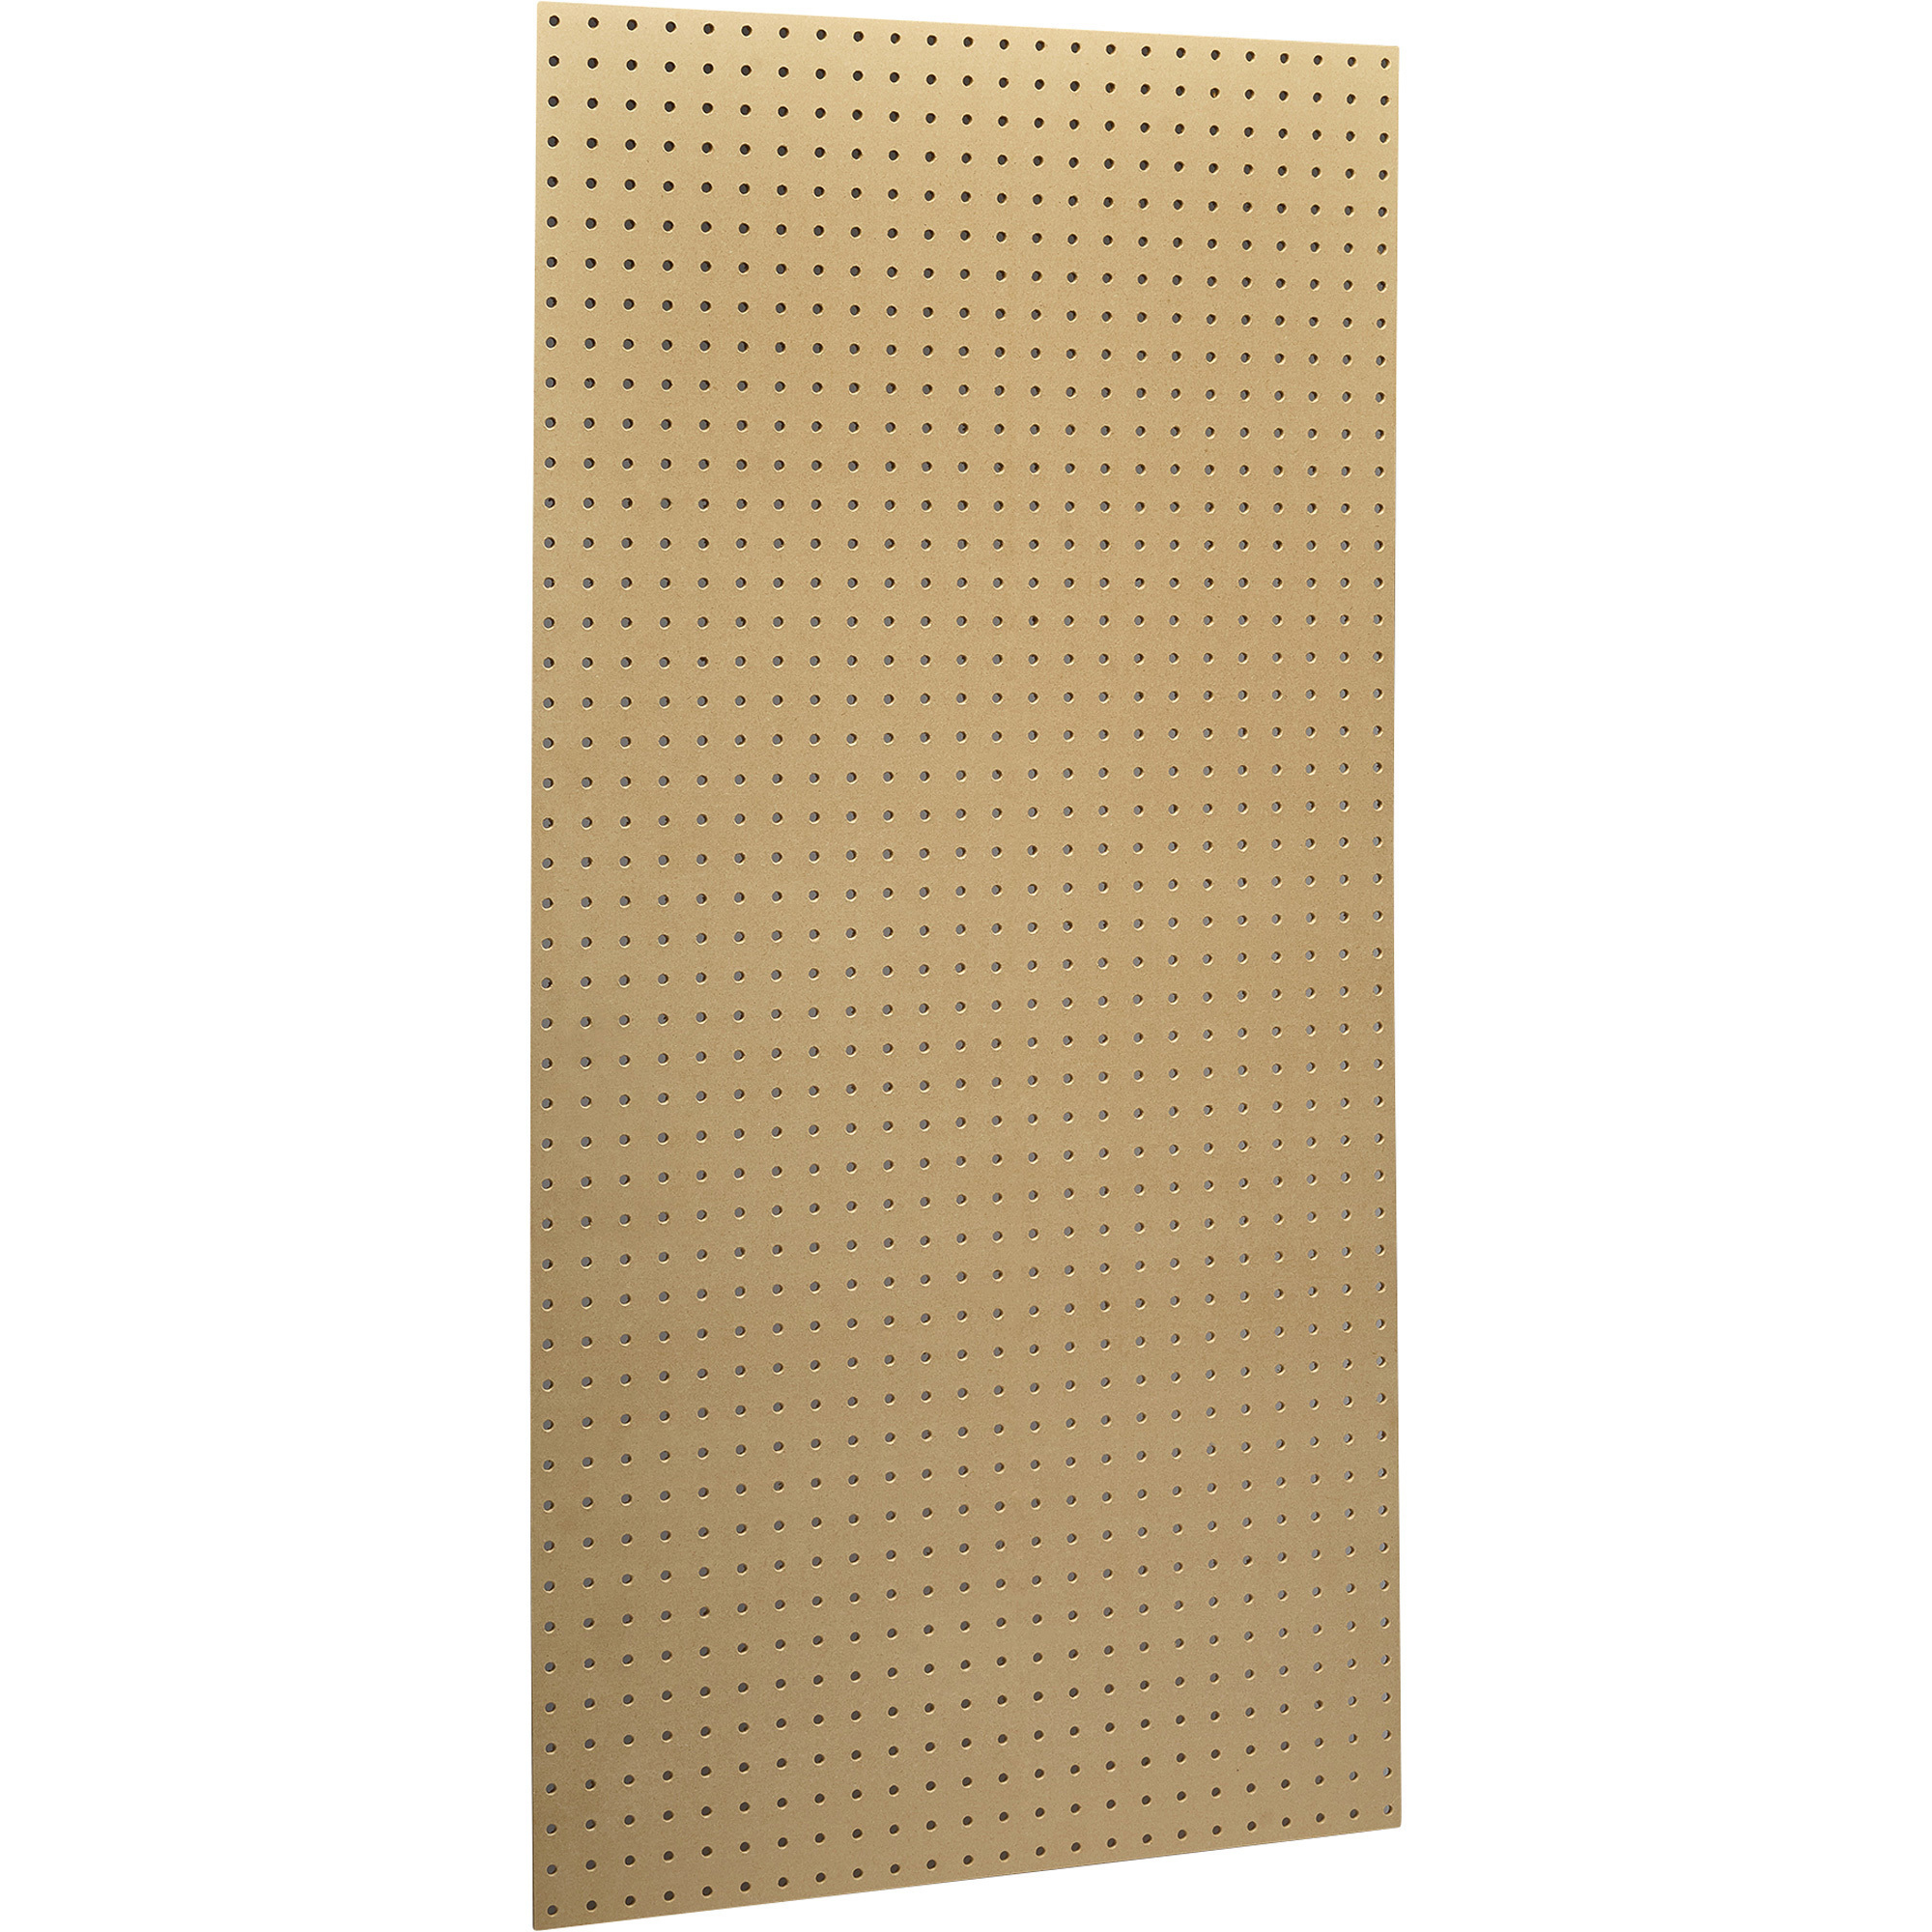 Triton HDF Pegboard and Hook 36-PieceKit, Natural, 48Inch x 24Inch, Model TPB-36NH-Kit